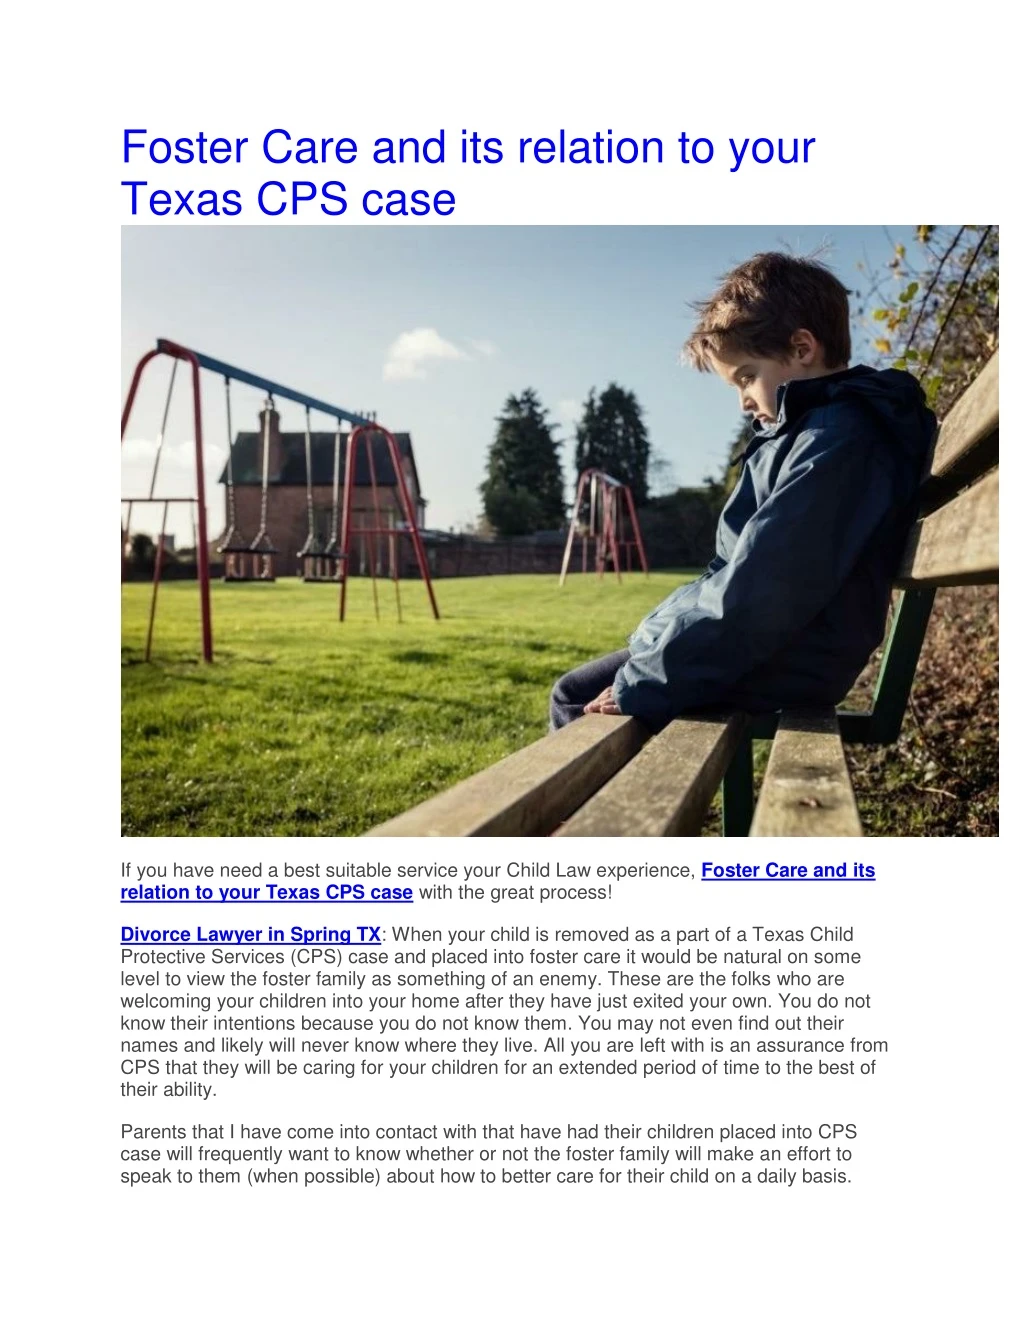 foster care and its relation to your texas